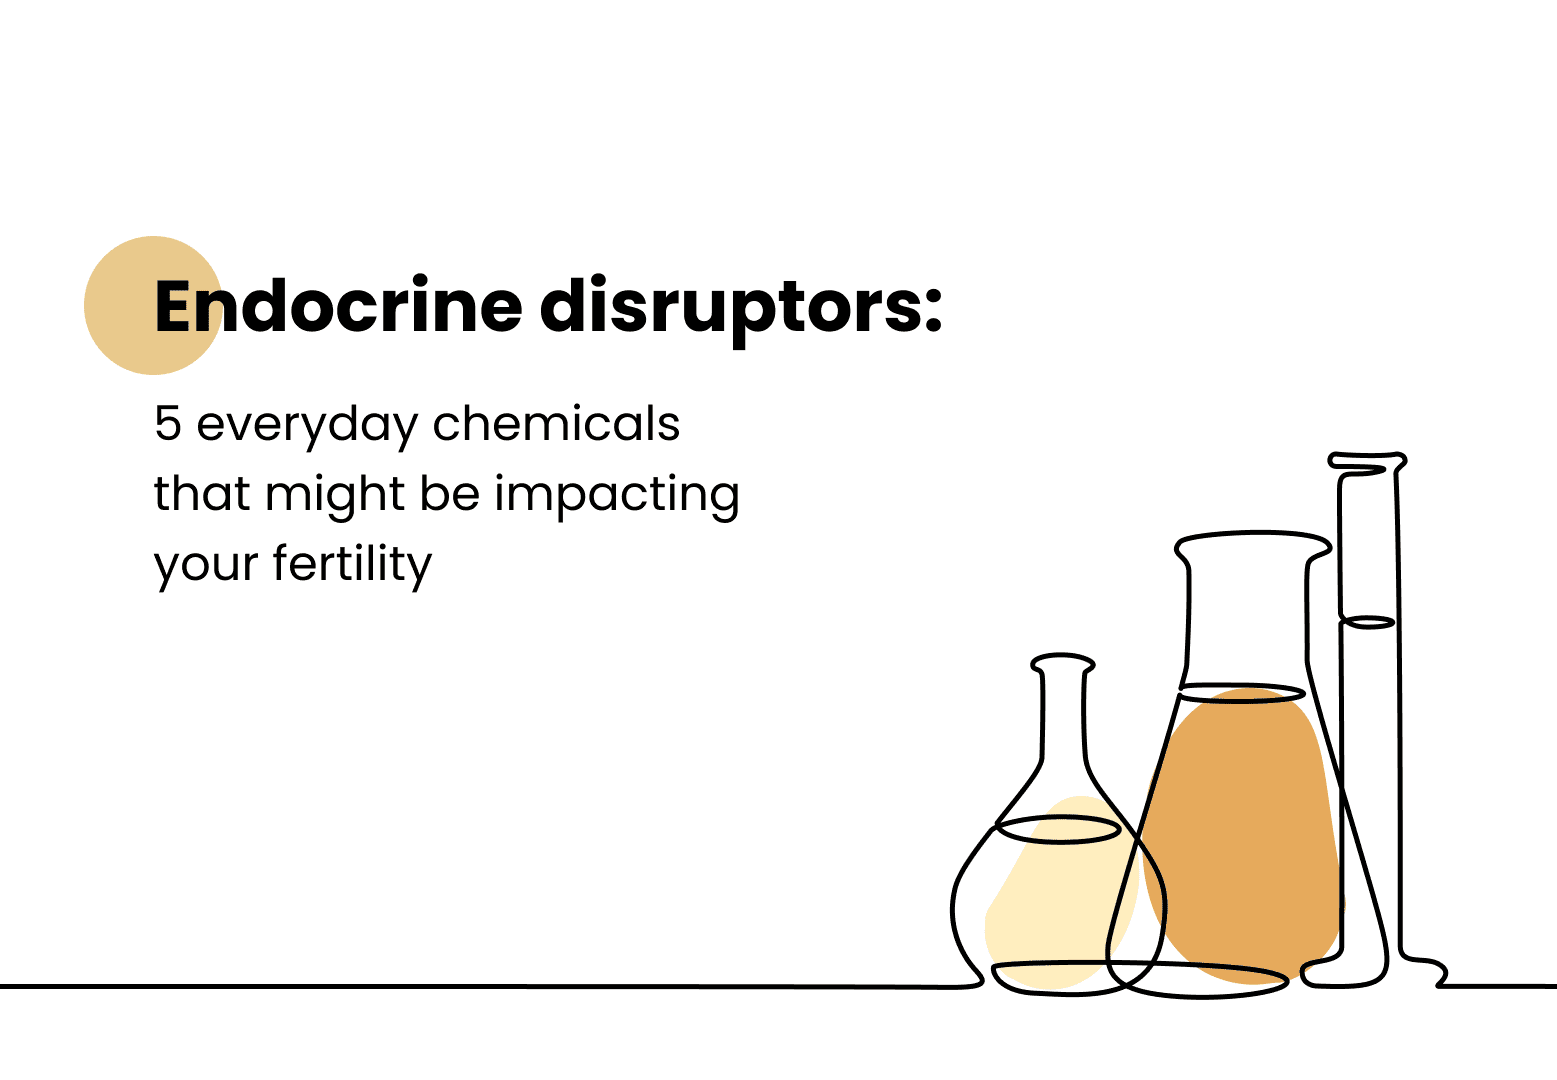 Endocrine Disruptors: 5 Everyday Chemicals that Might be Impacting your Fertility